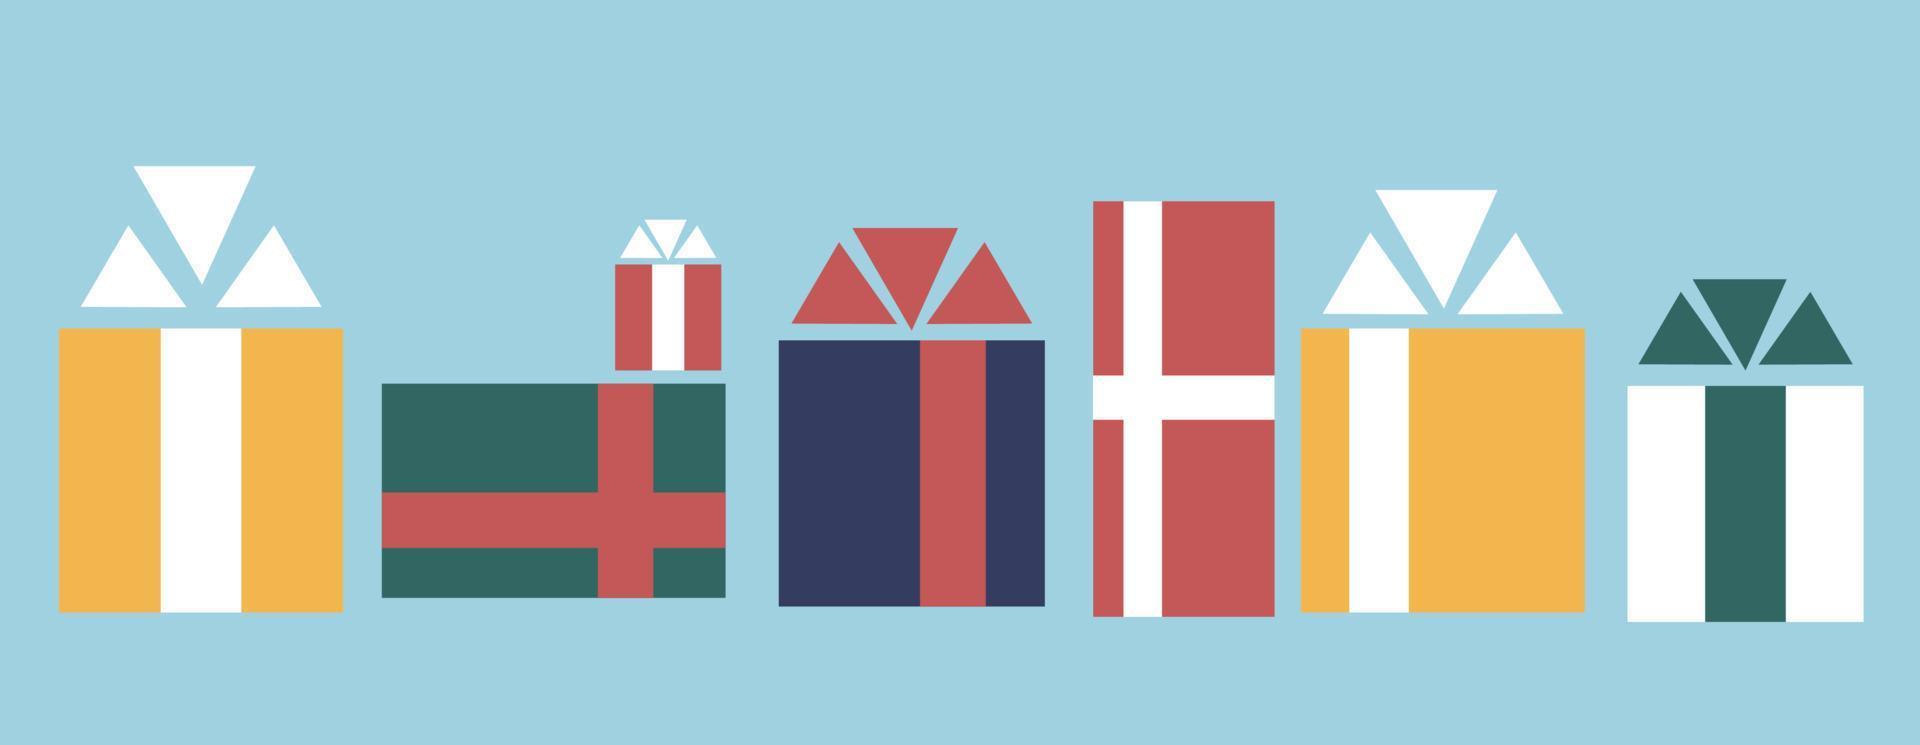 Christmas and new year presents, gift row of boxes vector